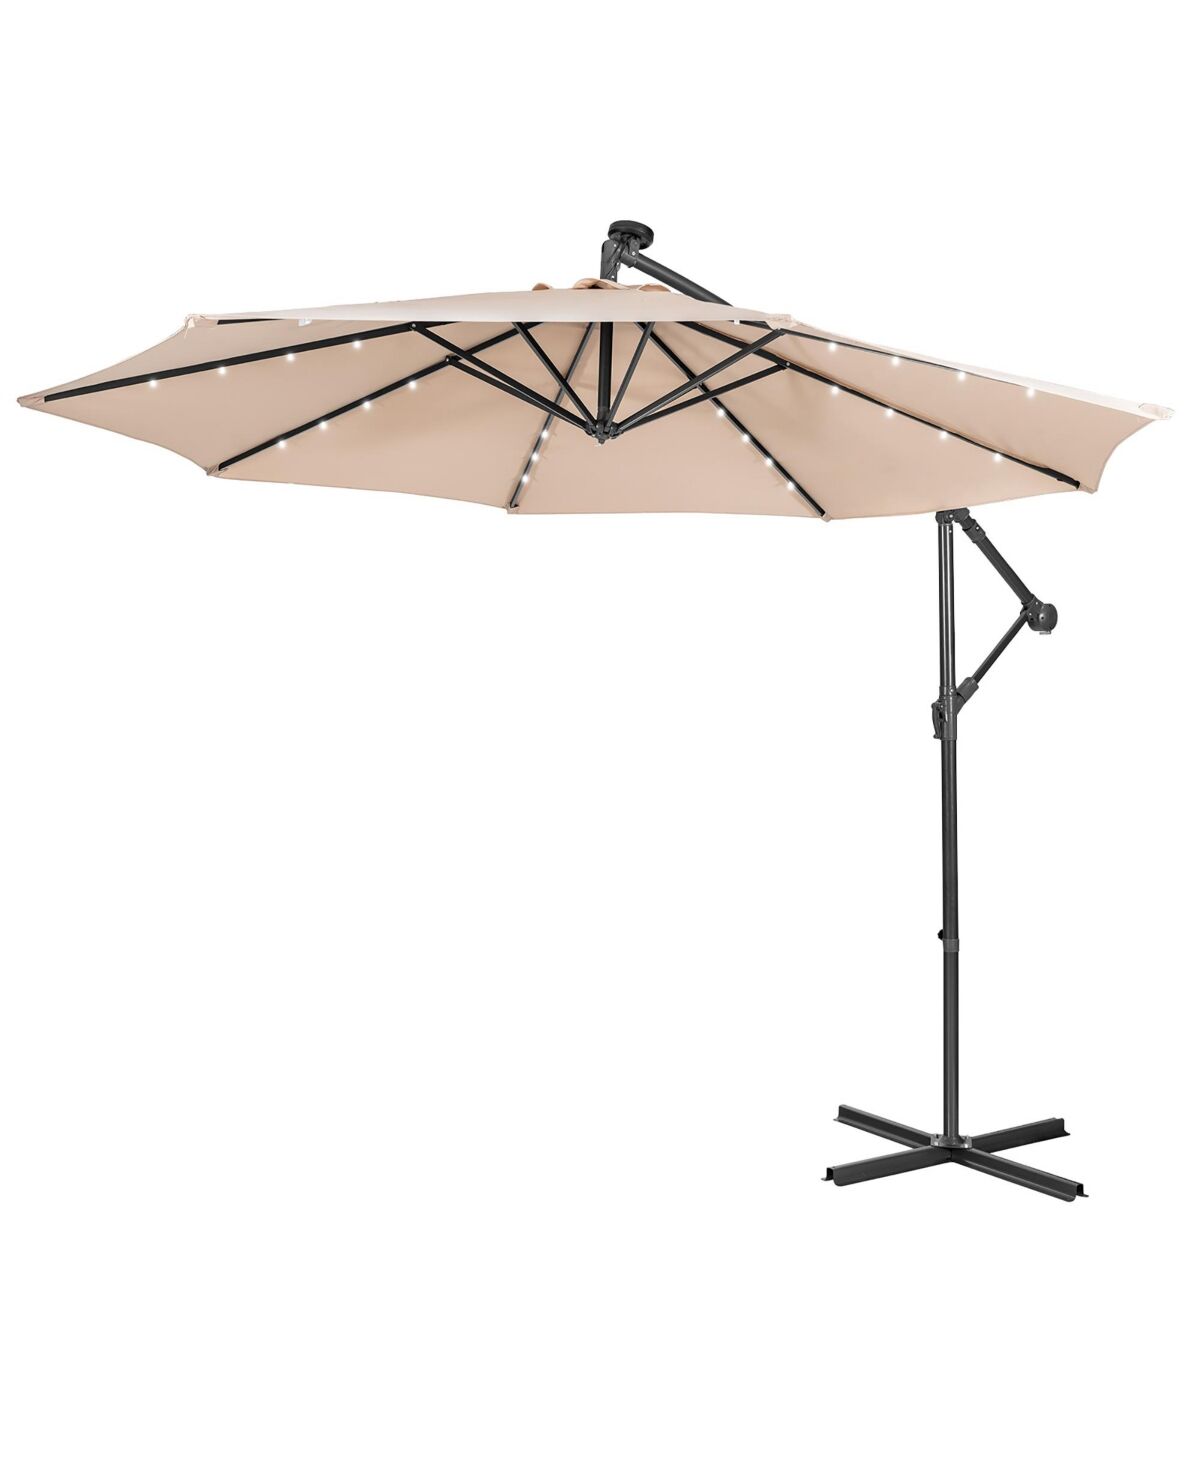 Costway 10FT Cantilever Solar Powered 32LED Lighted Patio Offset Umbrella Outdoor - Beige/khaki